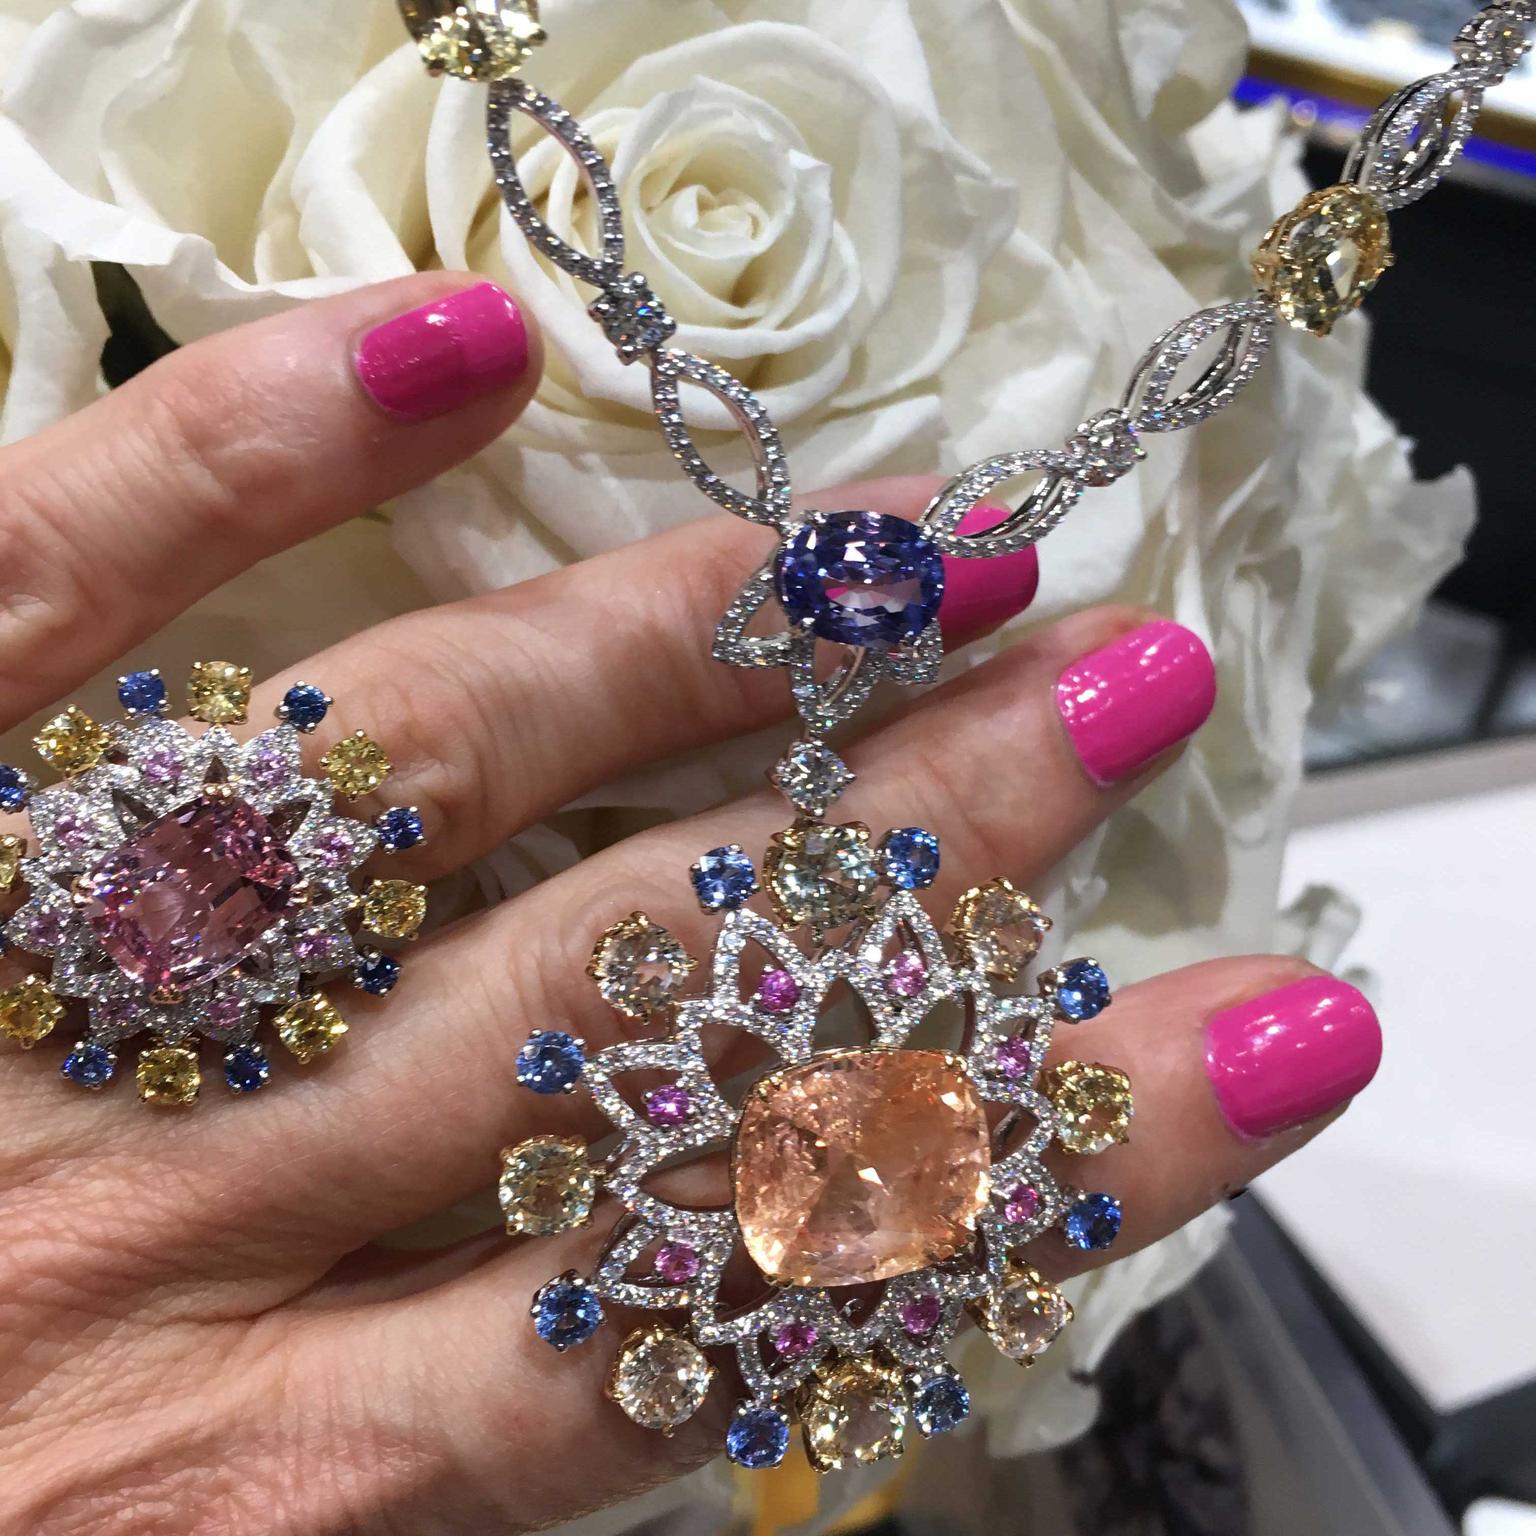 Mouawad presented two spectacular padparadscha sapphires at DJWE 2018 that show to perfection the two spectrums of this very rare sapphire.